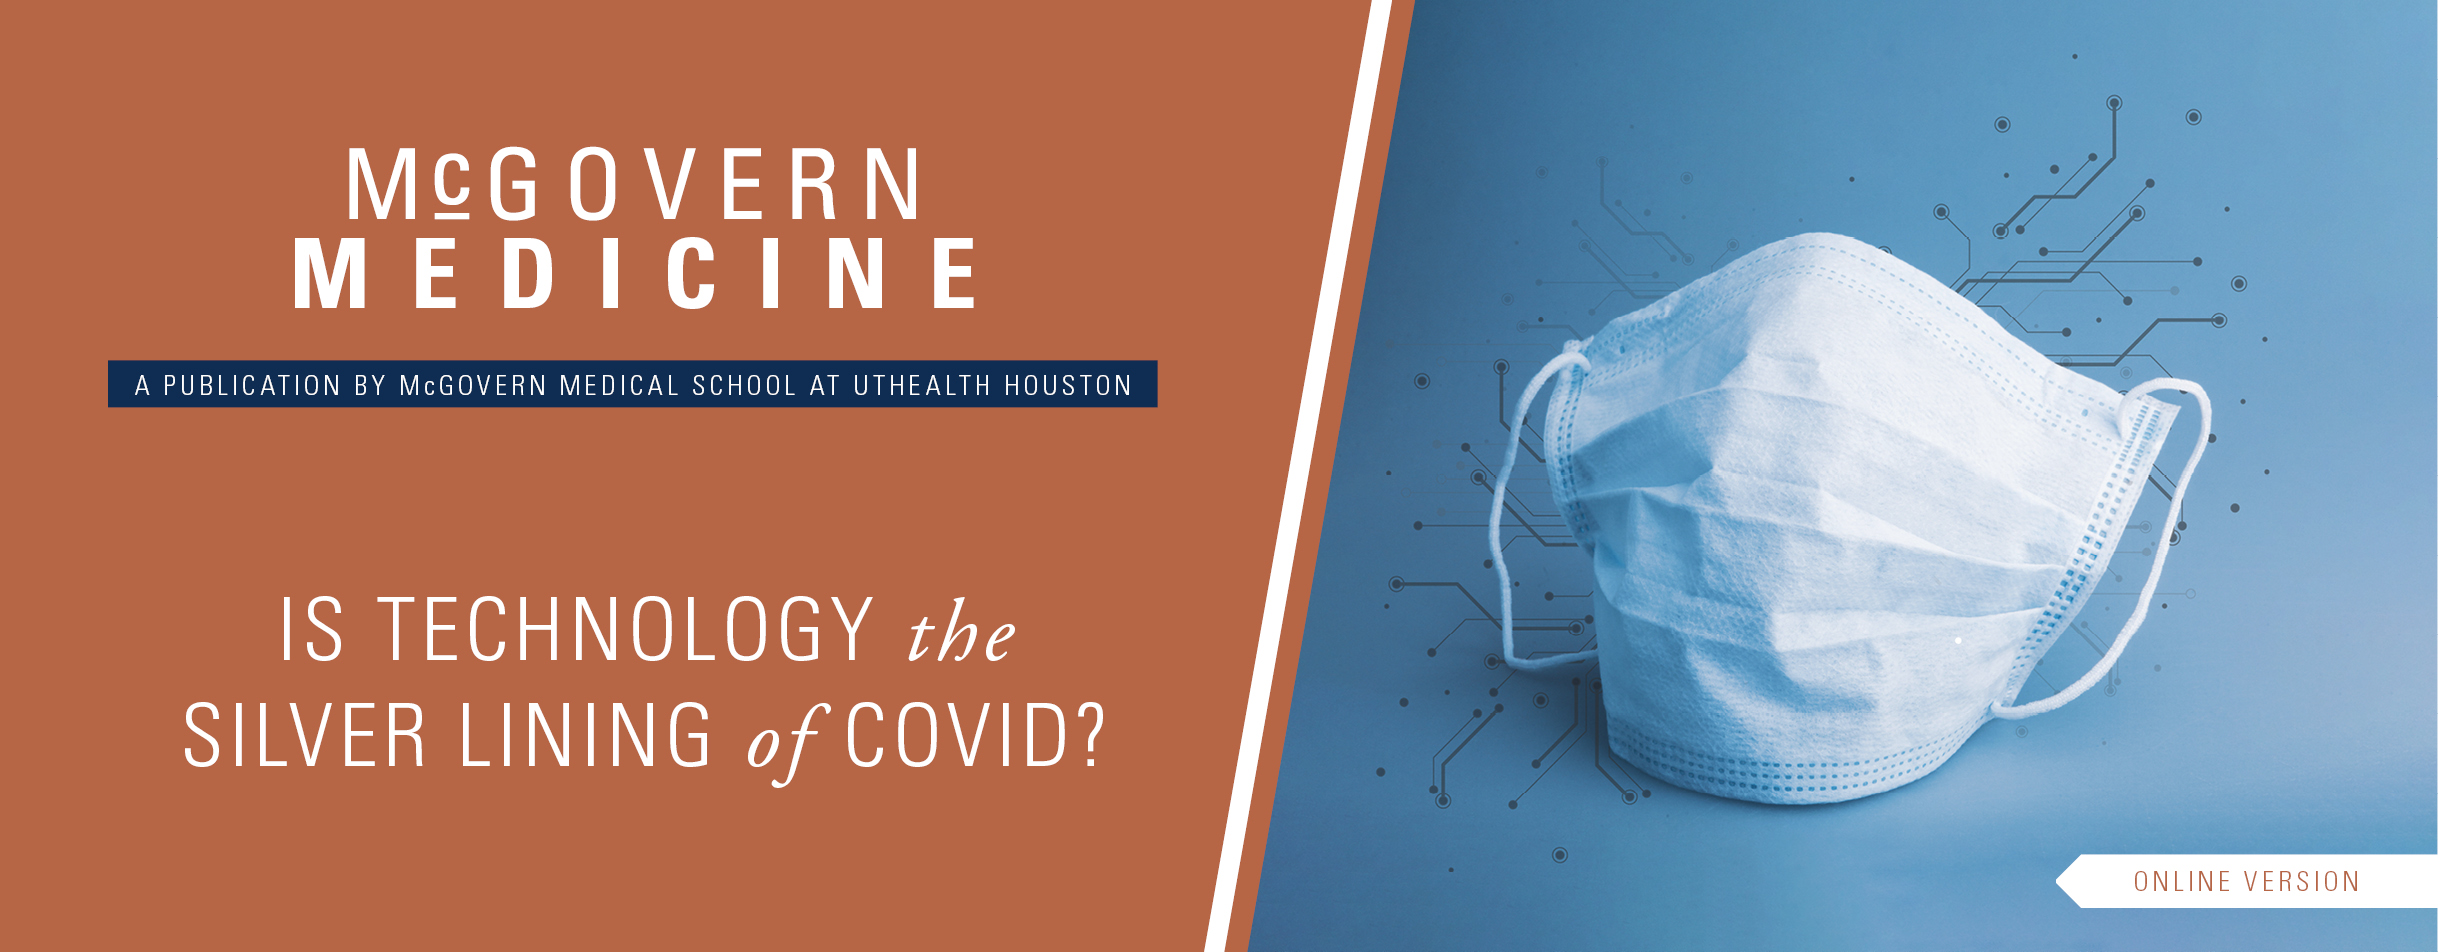 McGovern Medicine - Is Technology the Silver Lining of Covid?